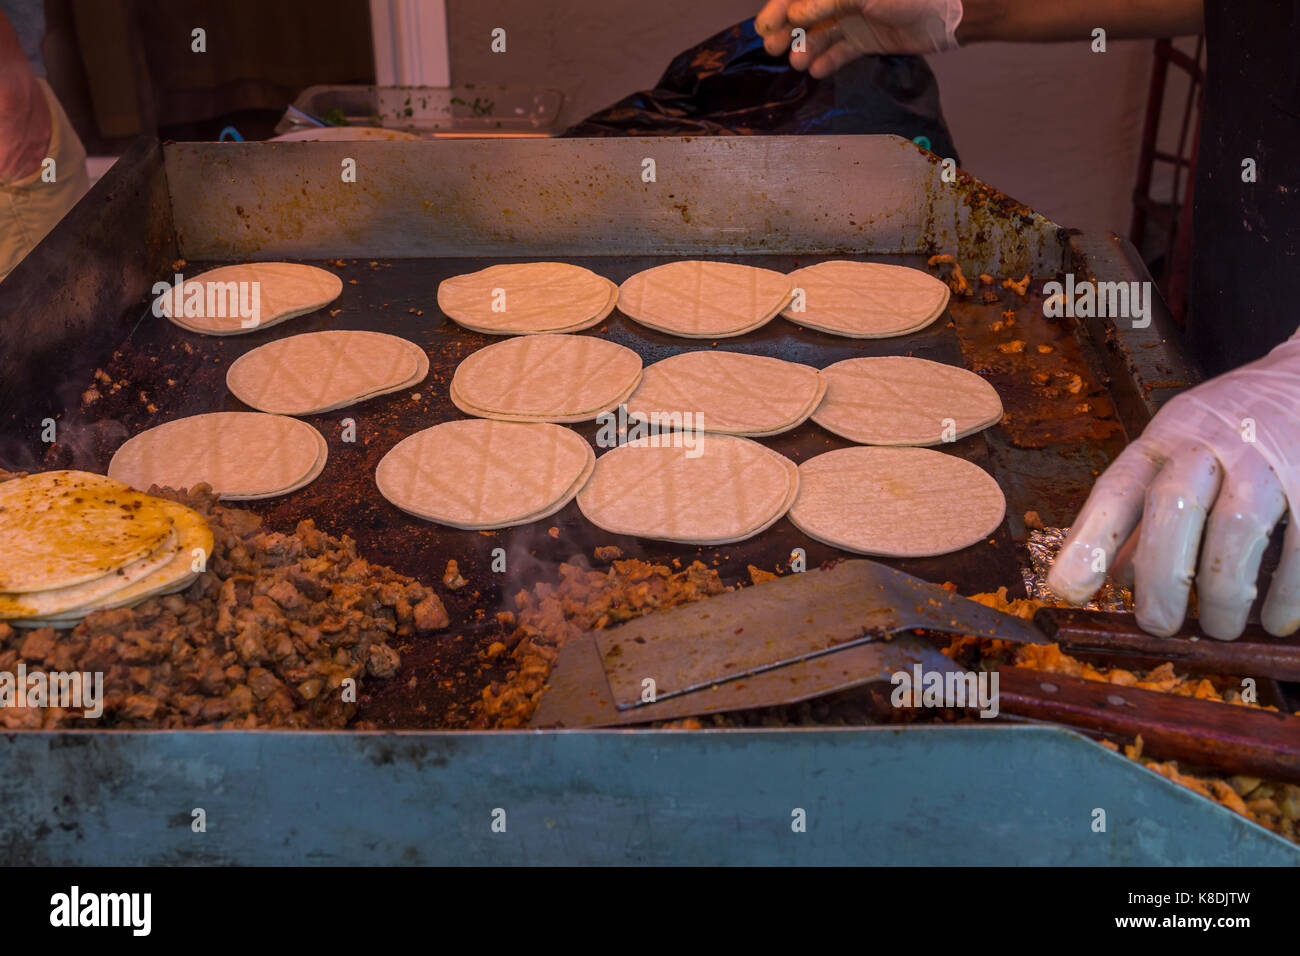 Hispanic man, cook, cooking on flat top grill, grilling meat, grilling meats, griddle, pool party, Castro Valley, Alameda County, California Stock Photo